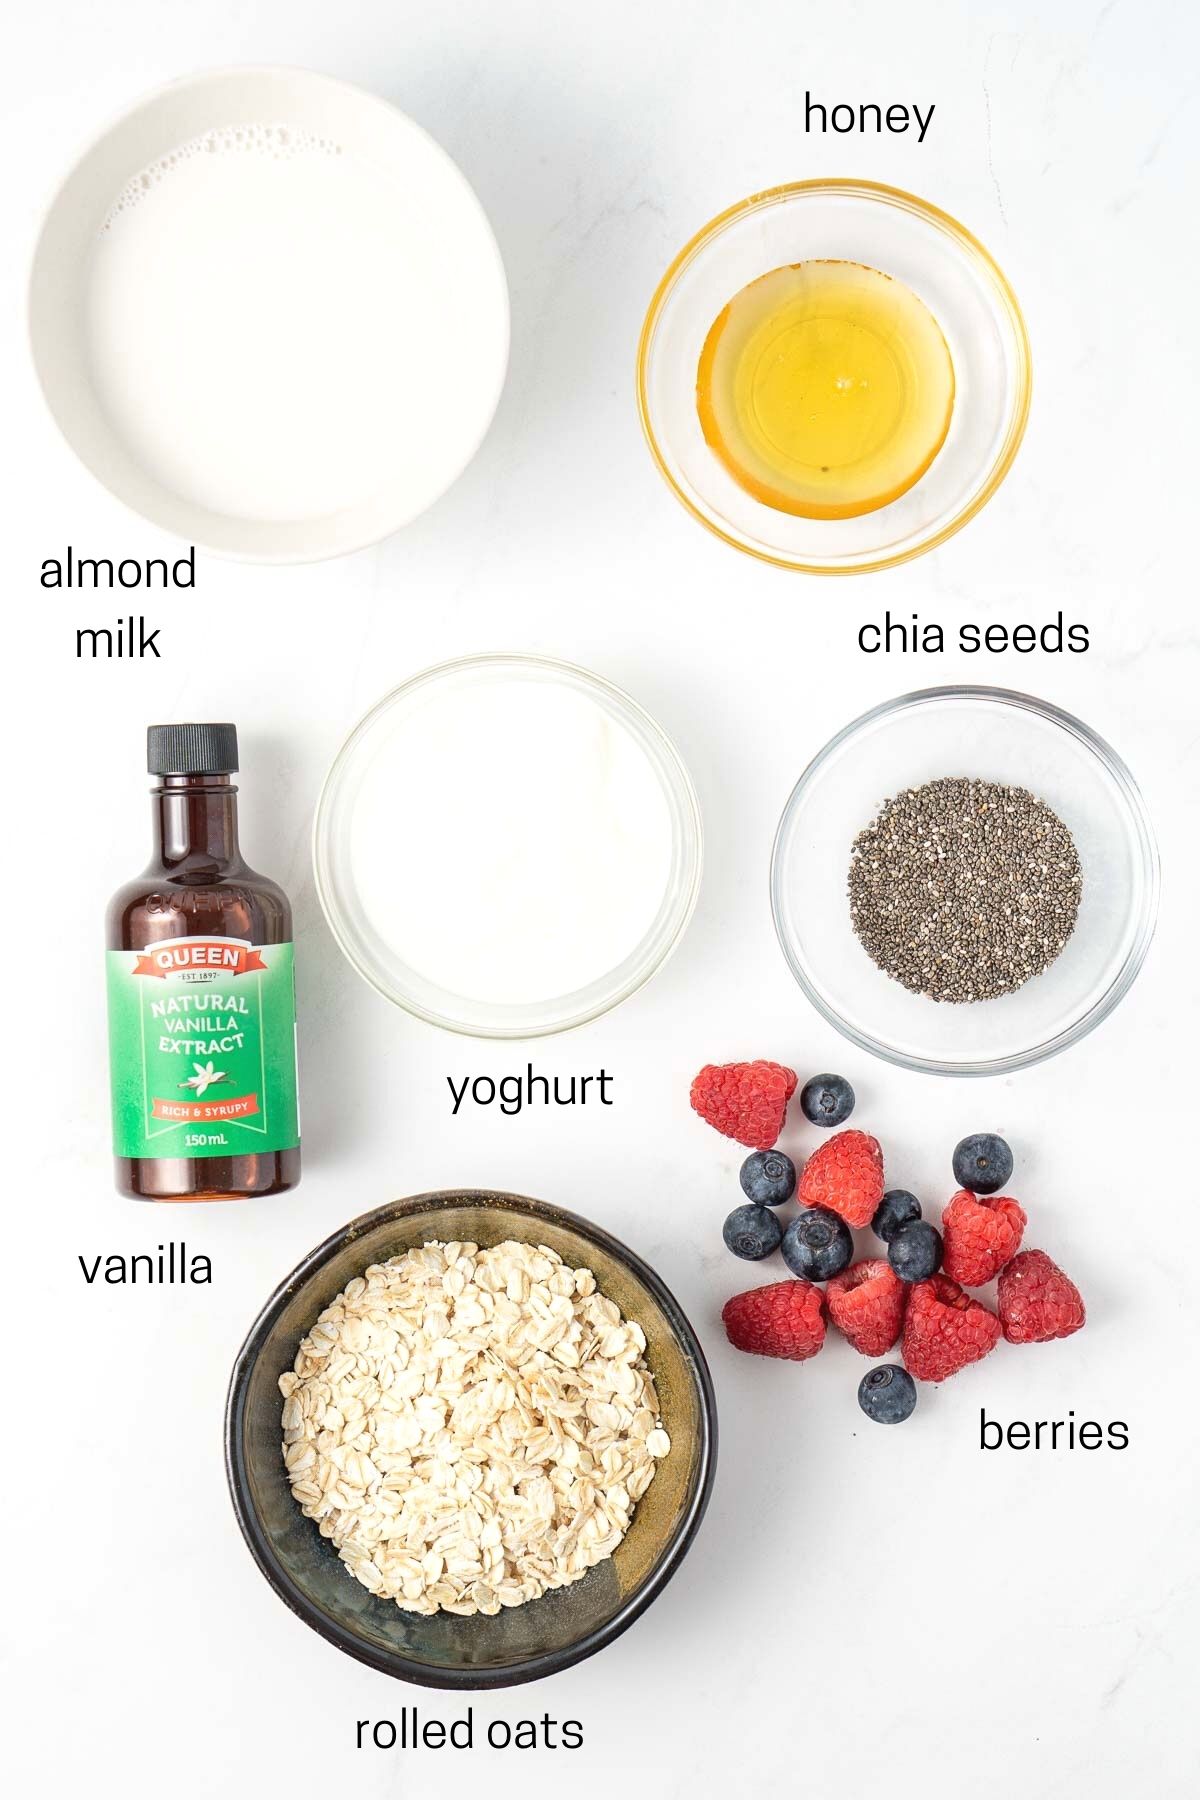 All ingredients needed for overnight oats laid out in small bowls.